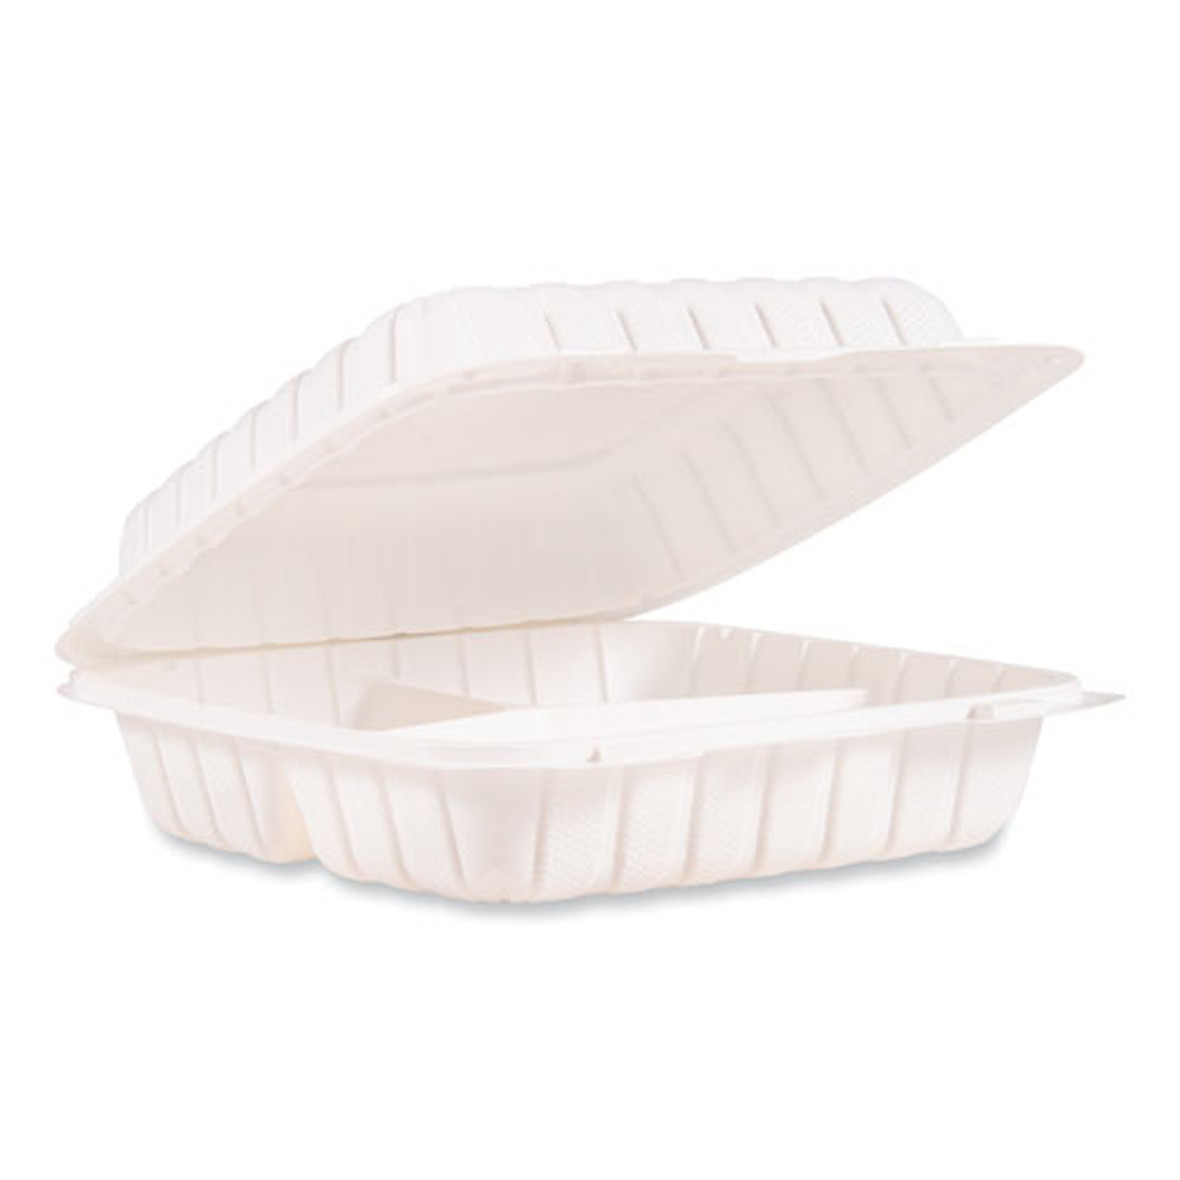 Dart Hinged Lid Containers, 3-Compartment, 9 X 8.75 X 3, White, Plastic, 150/carton